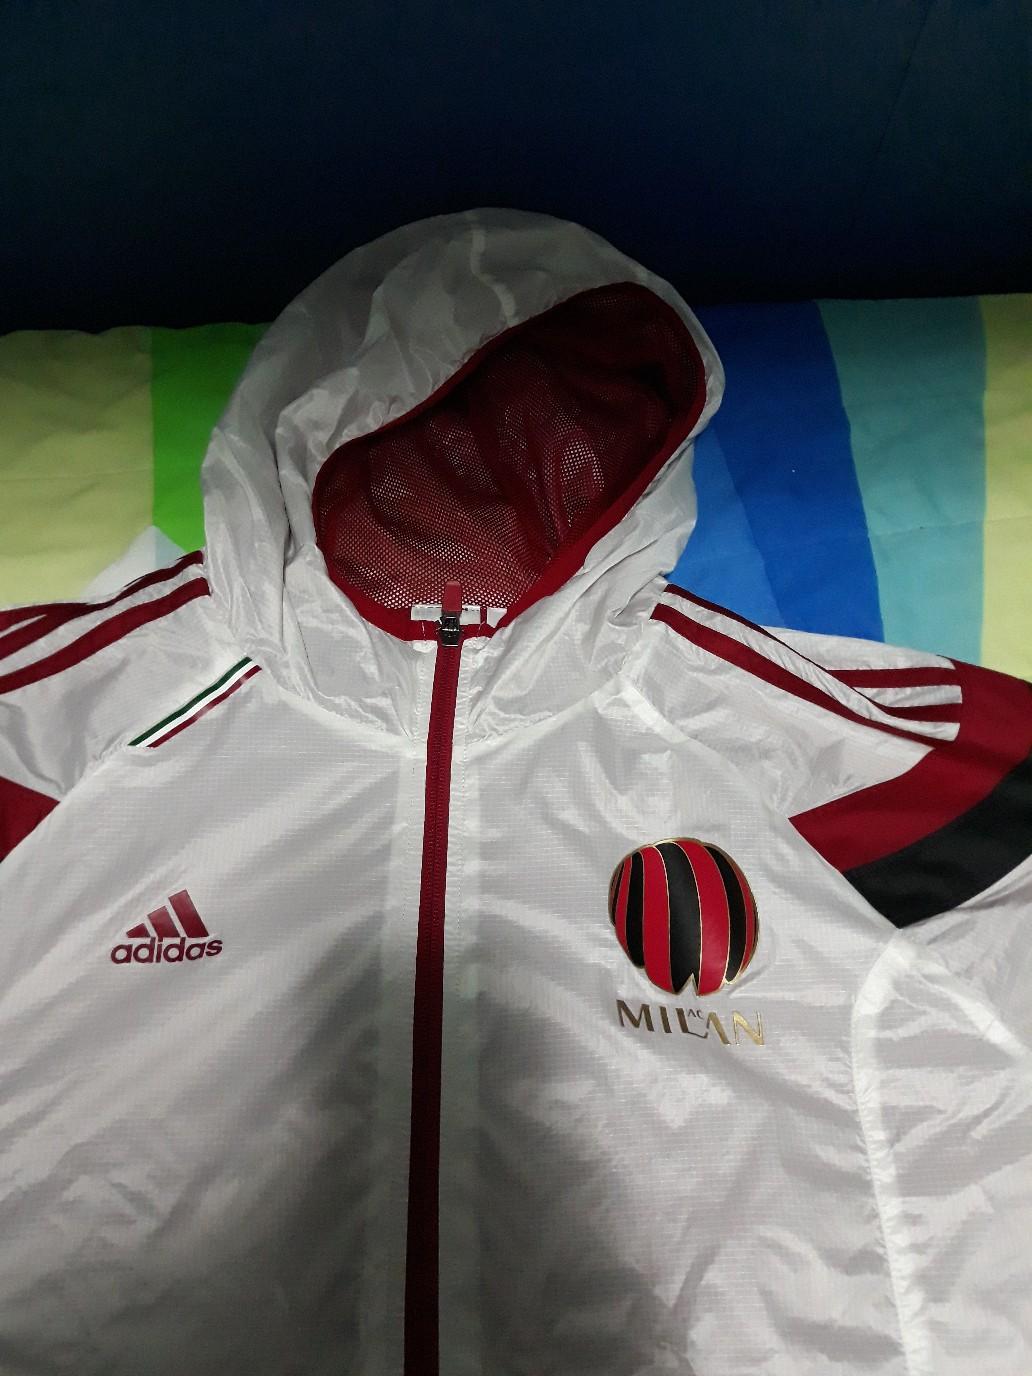 Giacca kway adidas del milan in 20020 Lainate for €50.00 for sale | Shpock